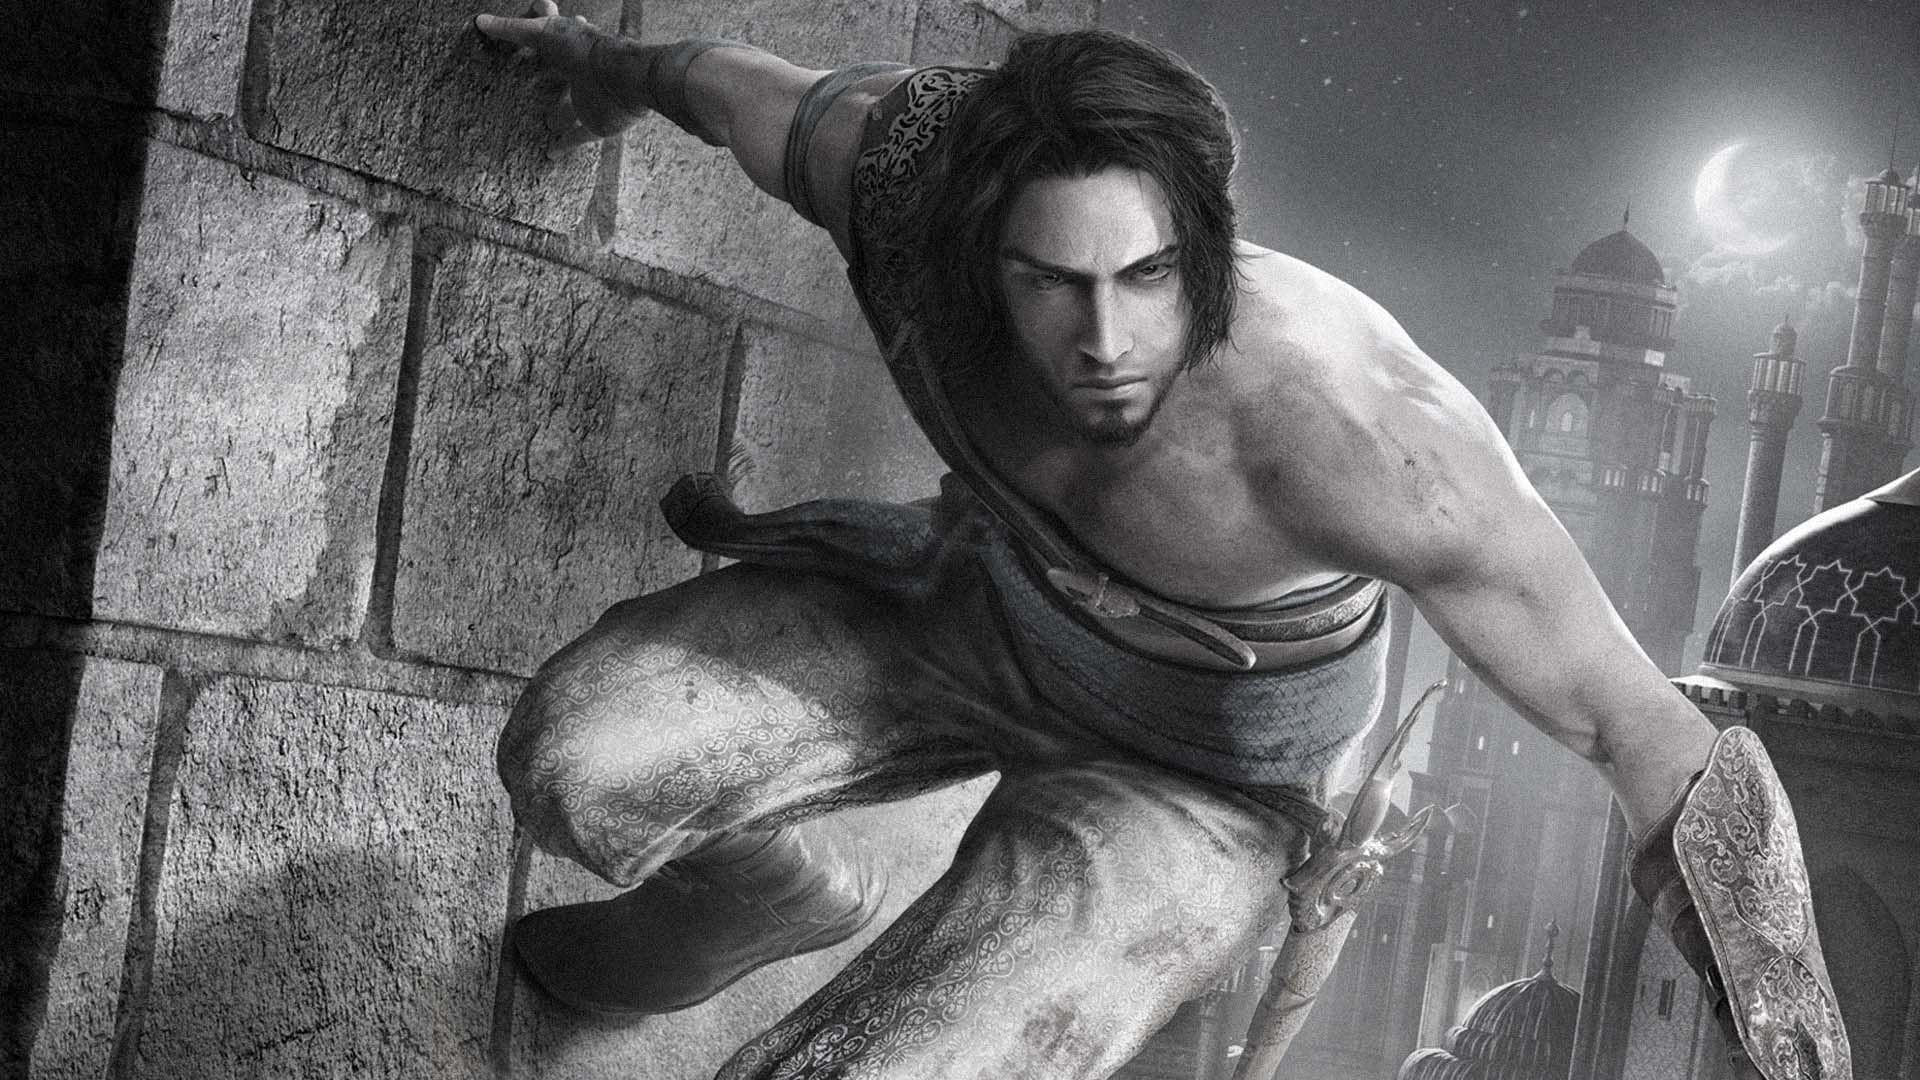 That Prince Of Persia Redemption Footage Came From A Real, Canceled Game